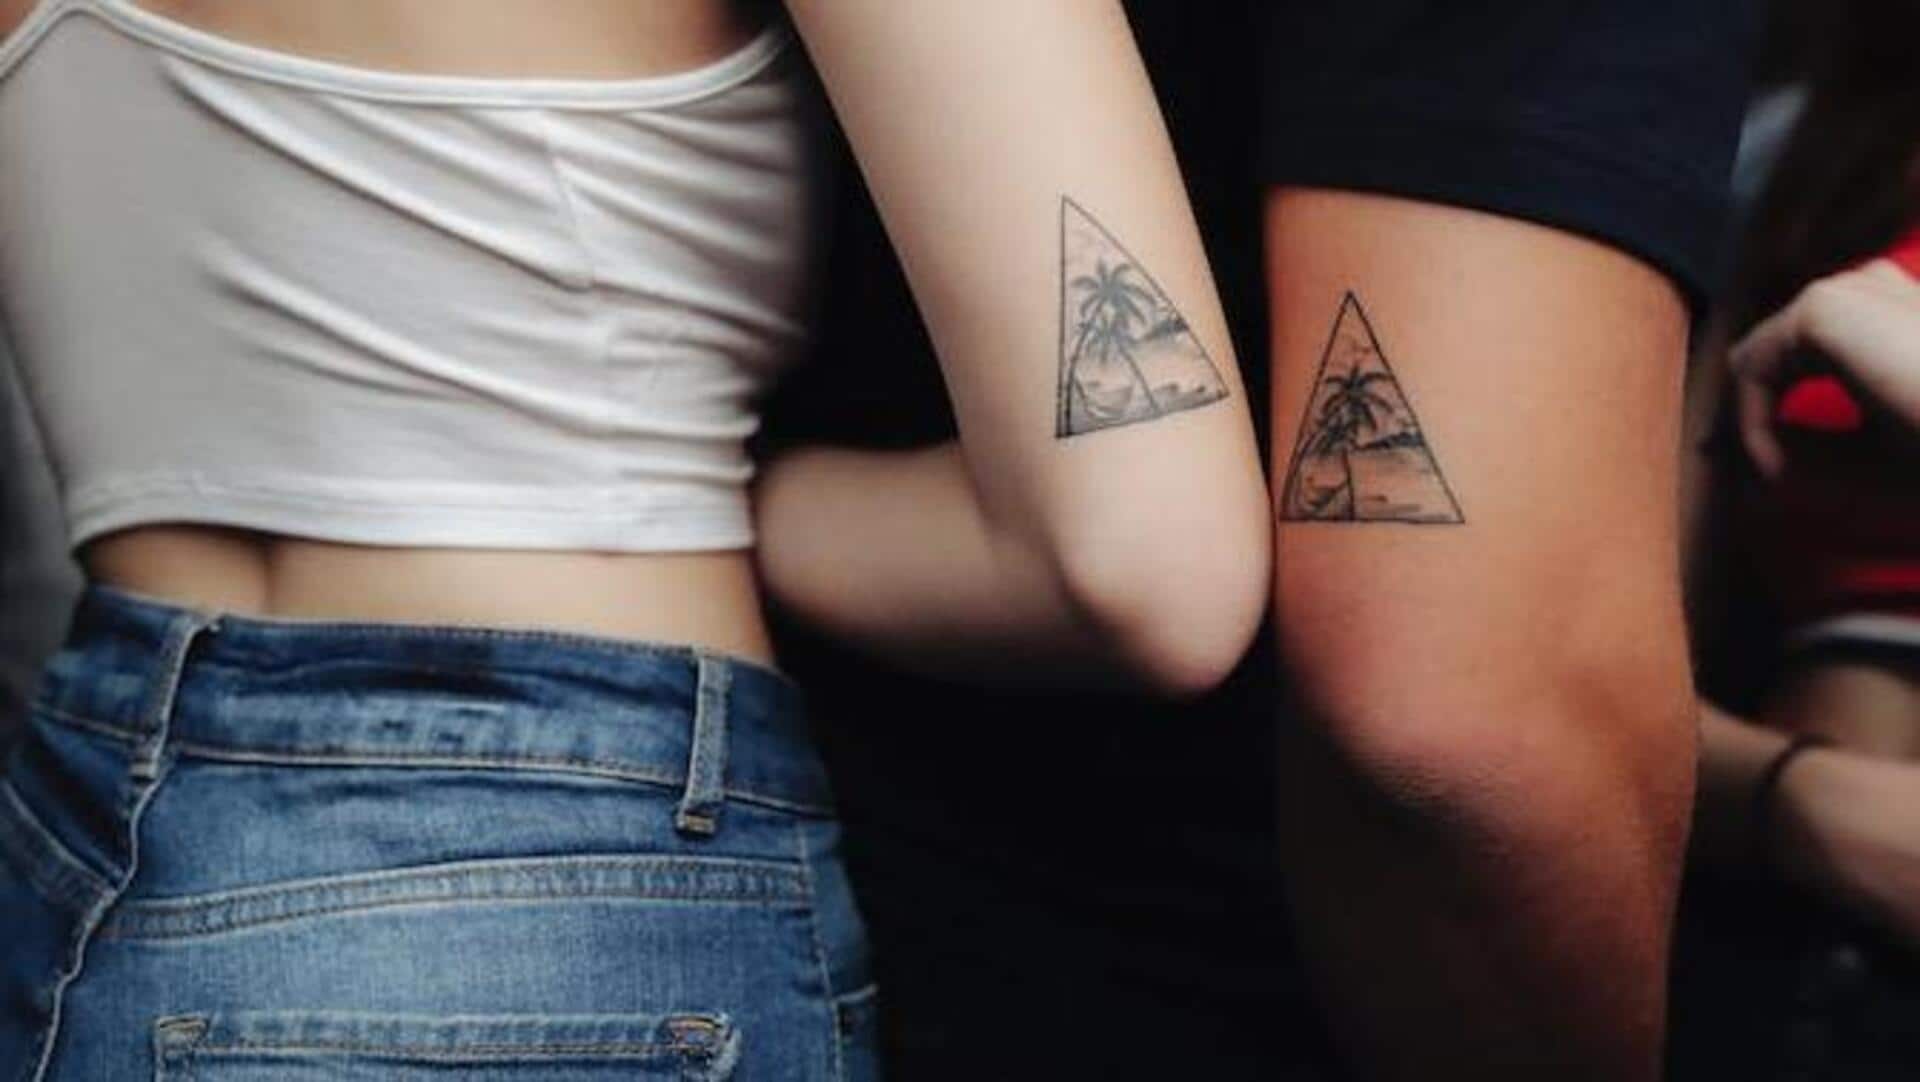 5 things to consider before getting matching tattoos